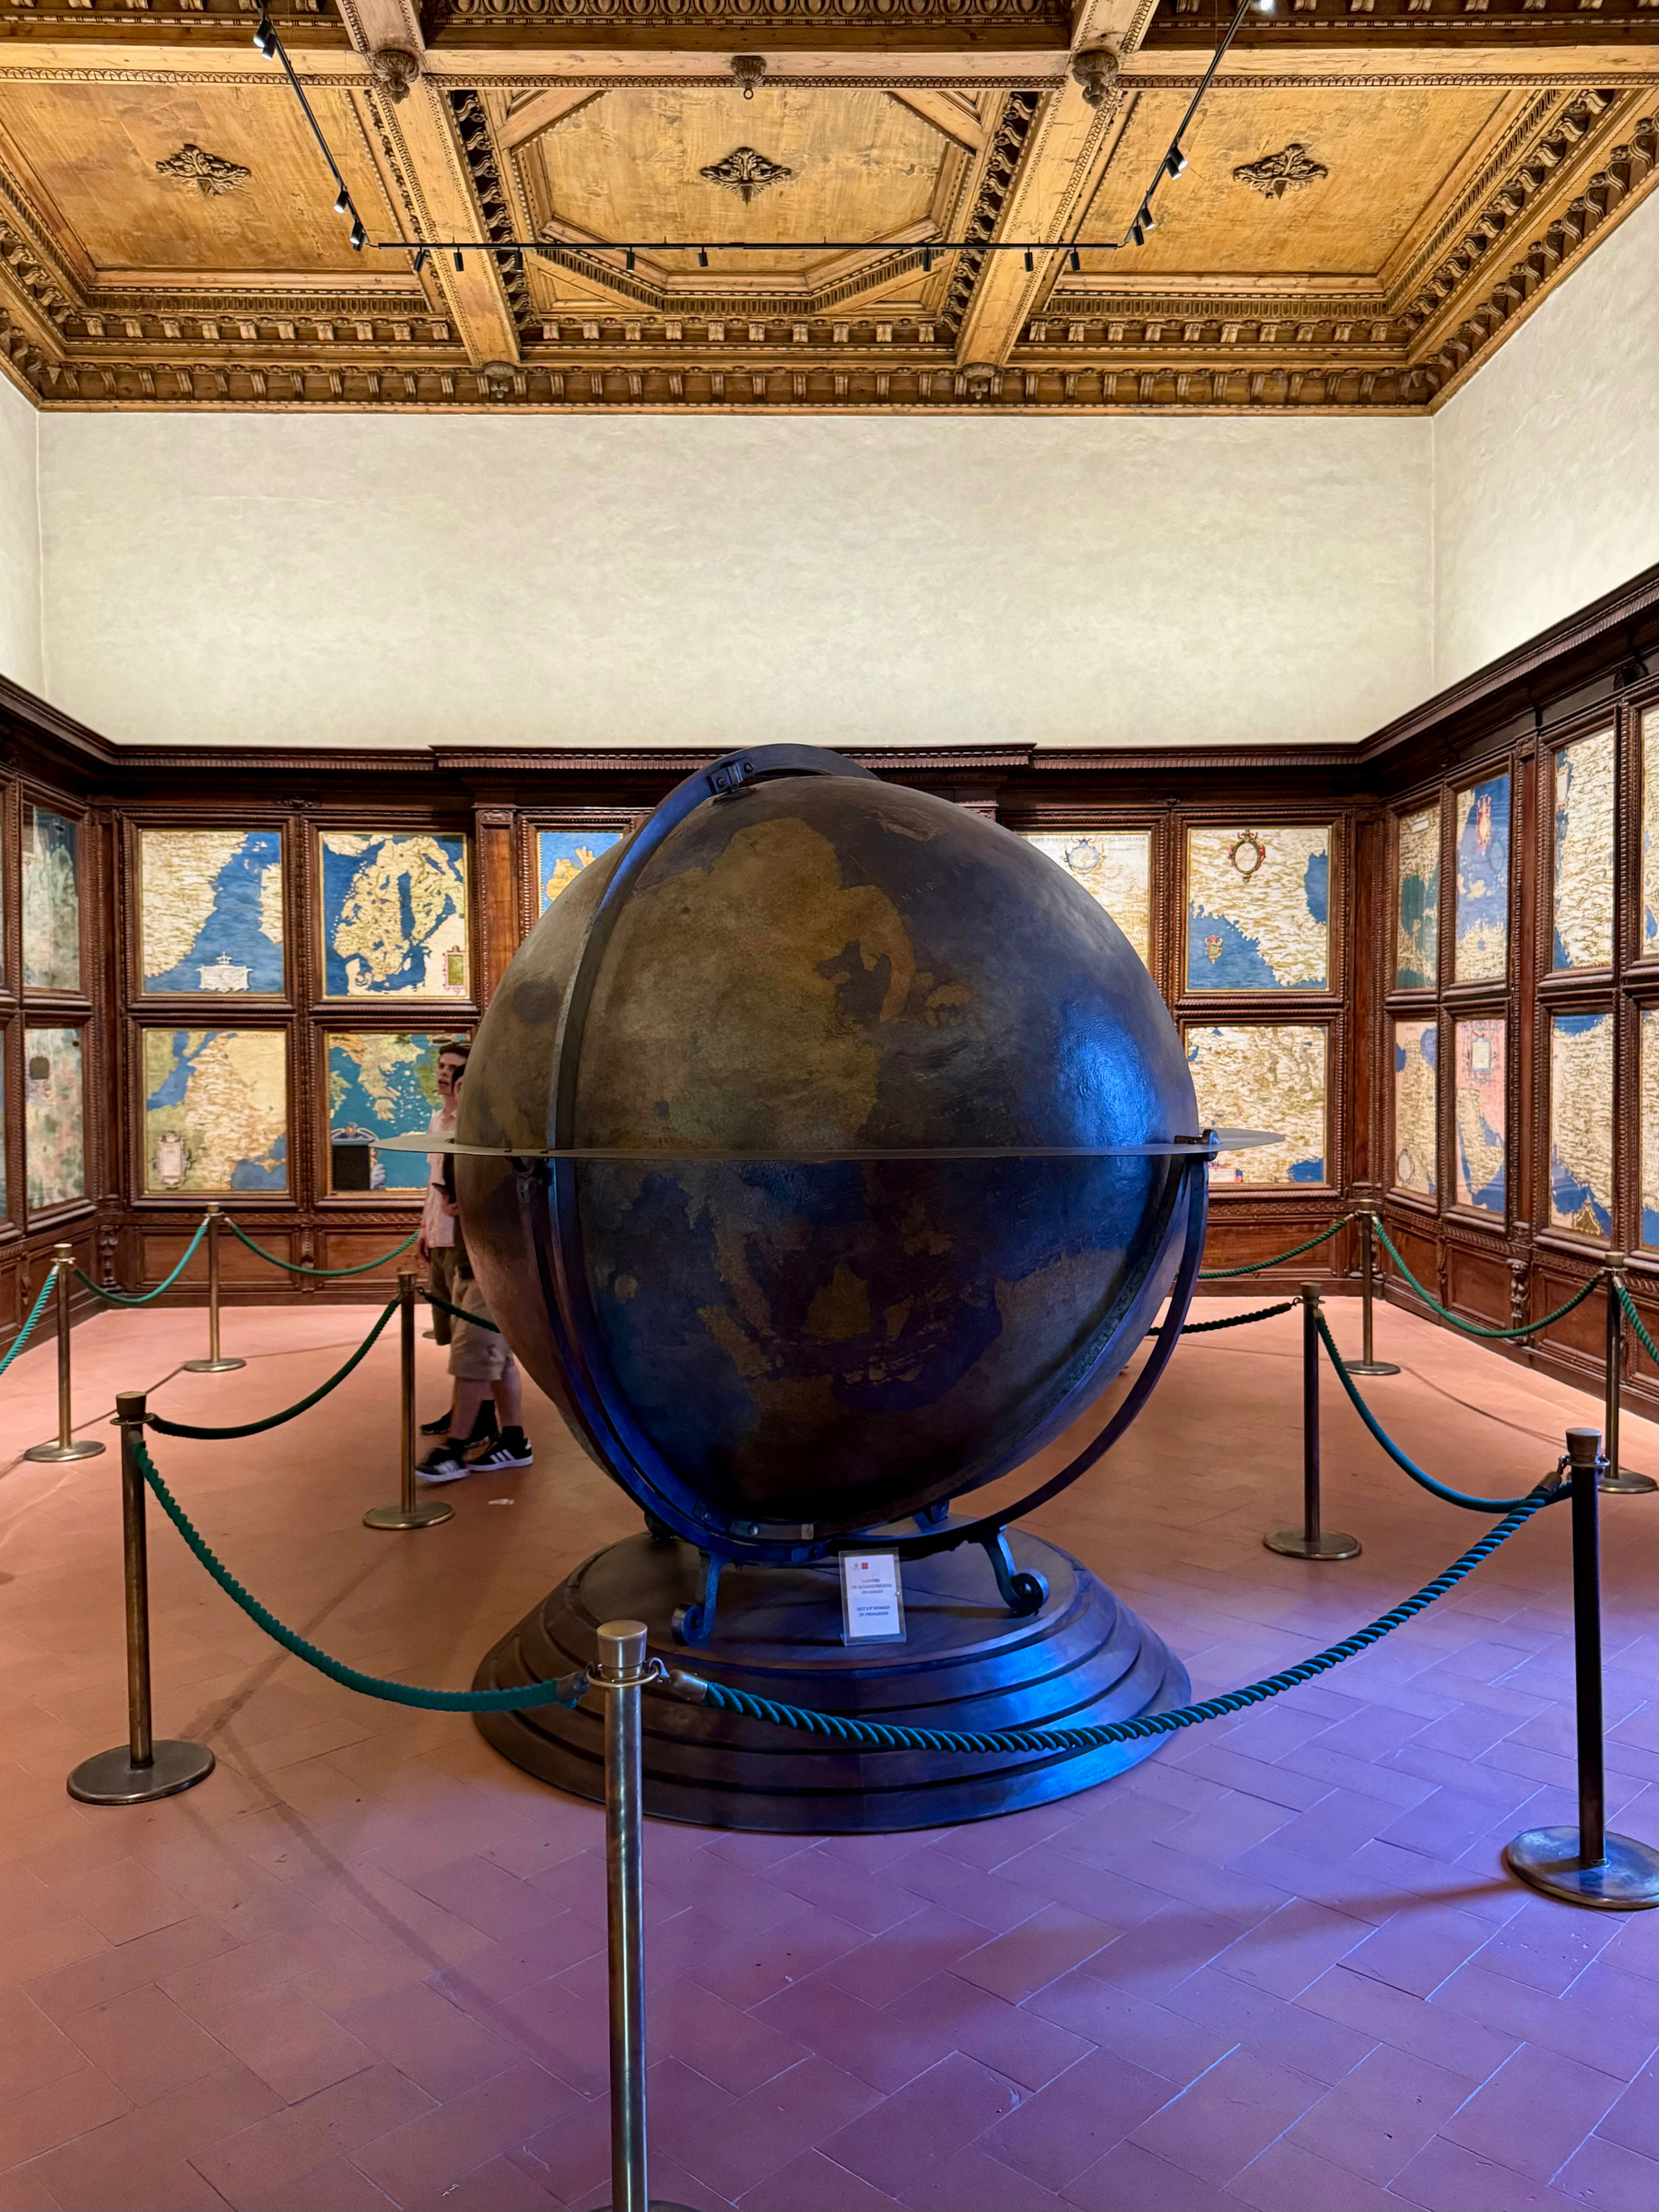 A large, antique globe is displayed in the center of a room surrounded by wooden paneling and world maps. The ceiling is ornately decorated, and the globe is enclosed by ropes to keep viewers at a distance. 